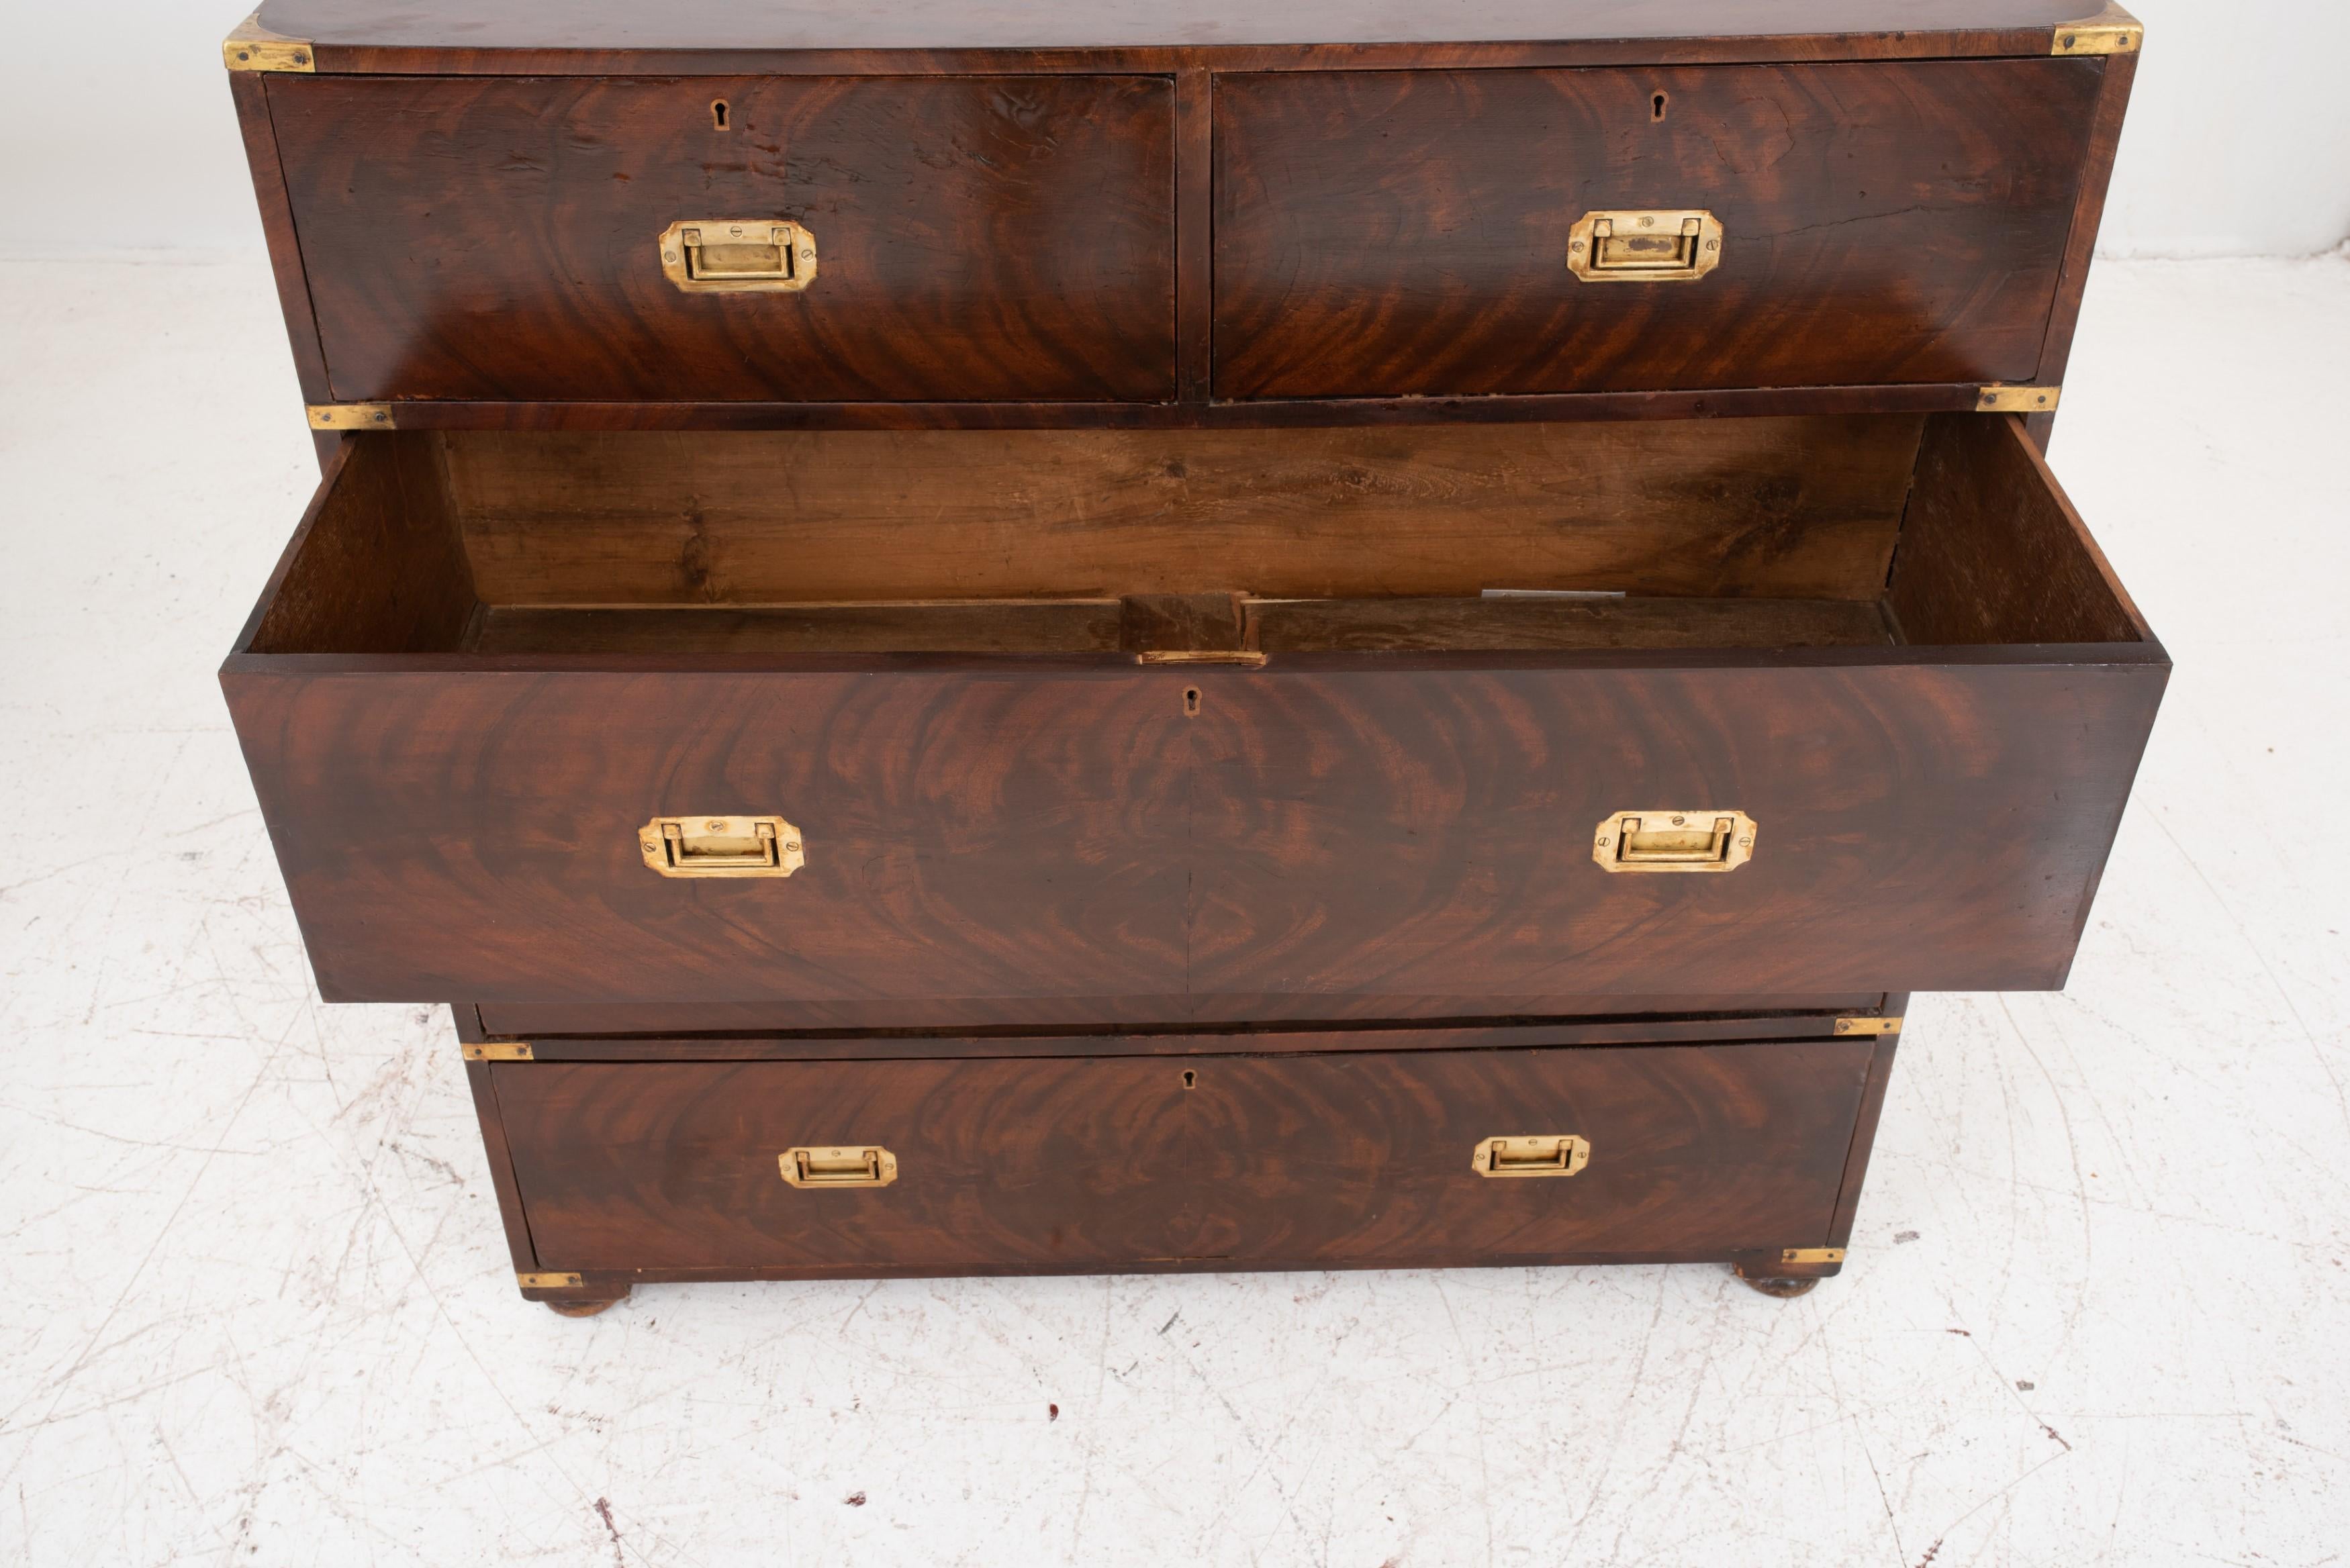  Campaign-style brass-bound mahogany four-drawer chest. Here's a breakdown of its key features:

Style: Campaign style - Characterized by portability, durability, and often featuring brass hardware and leather accents.

Material:

Body: Mahogany - A